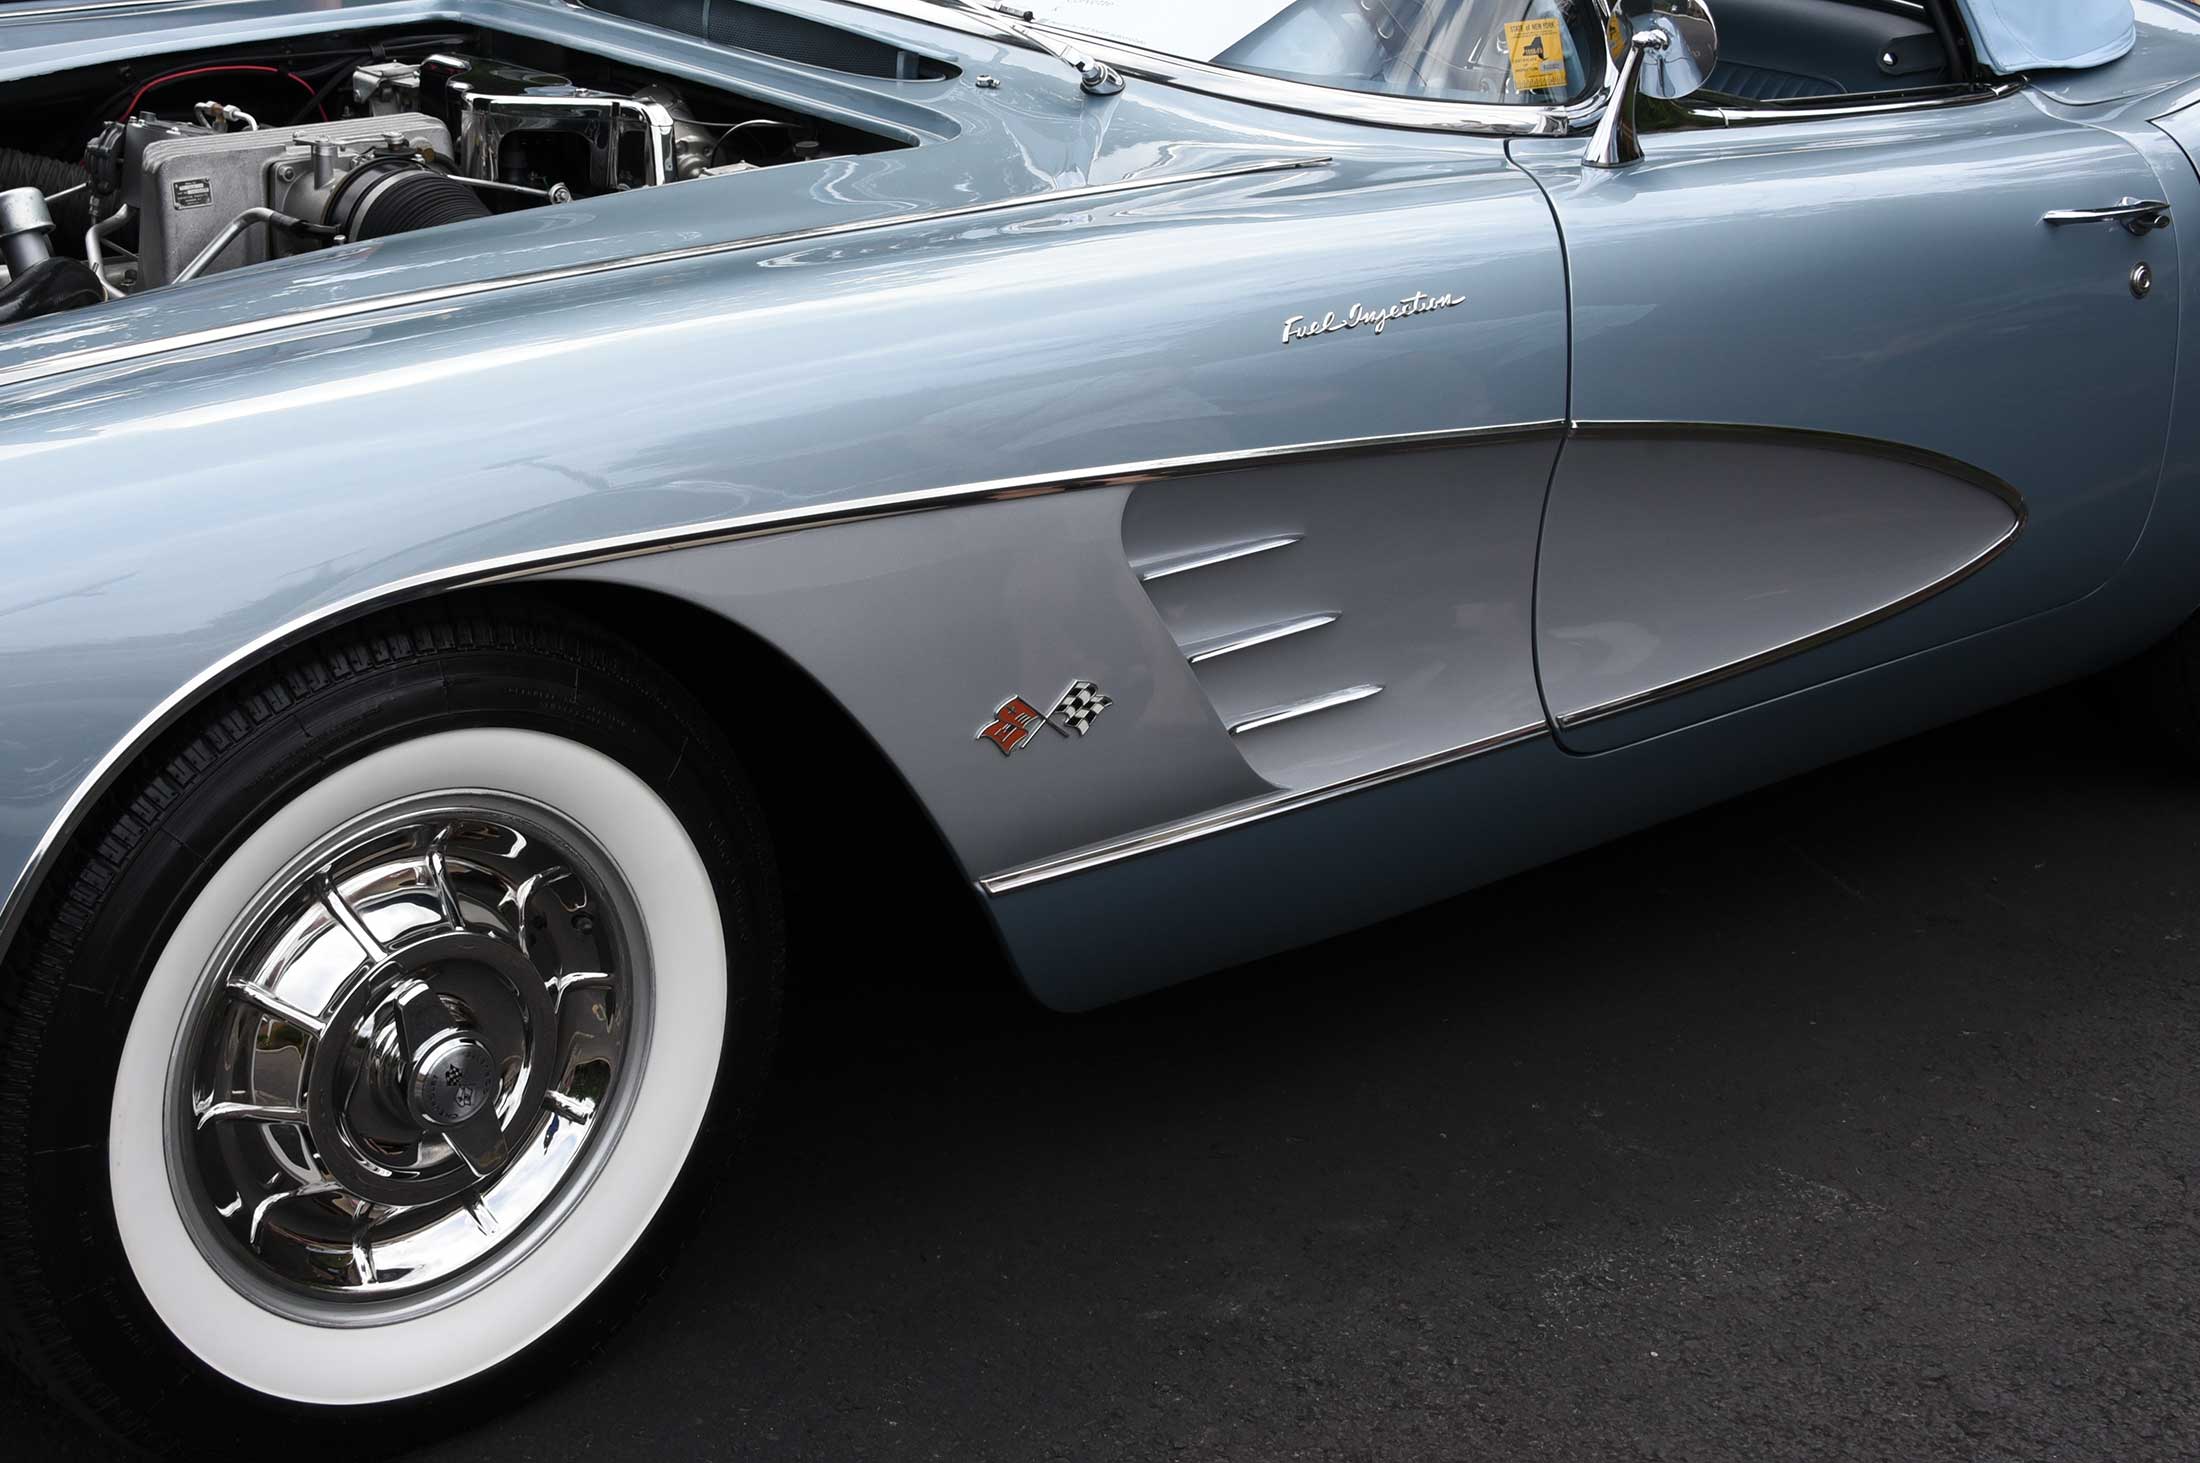 Gray Corvette on display at The New Hope Automobile Show